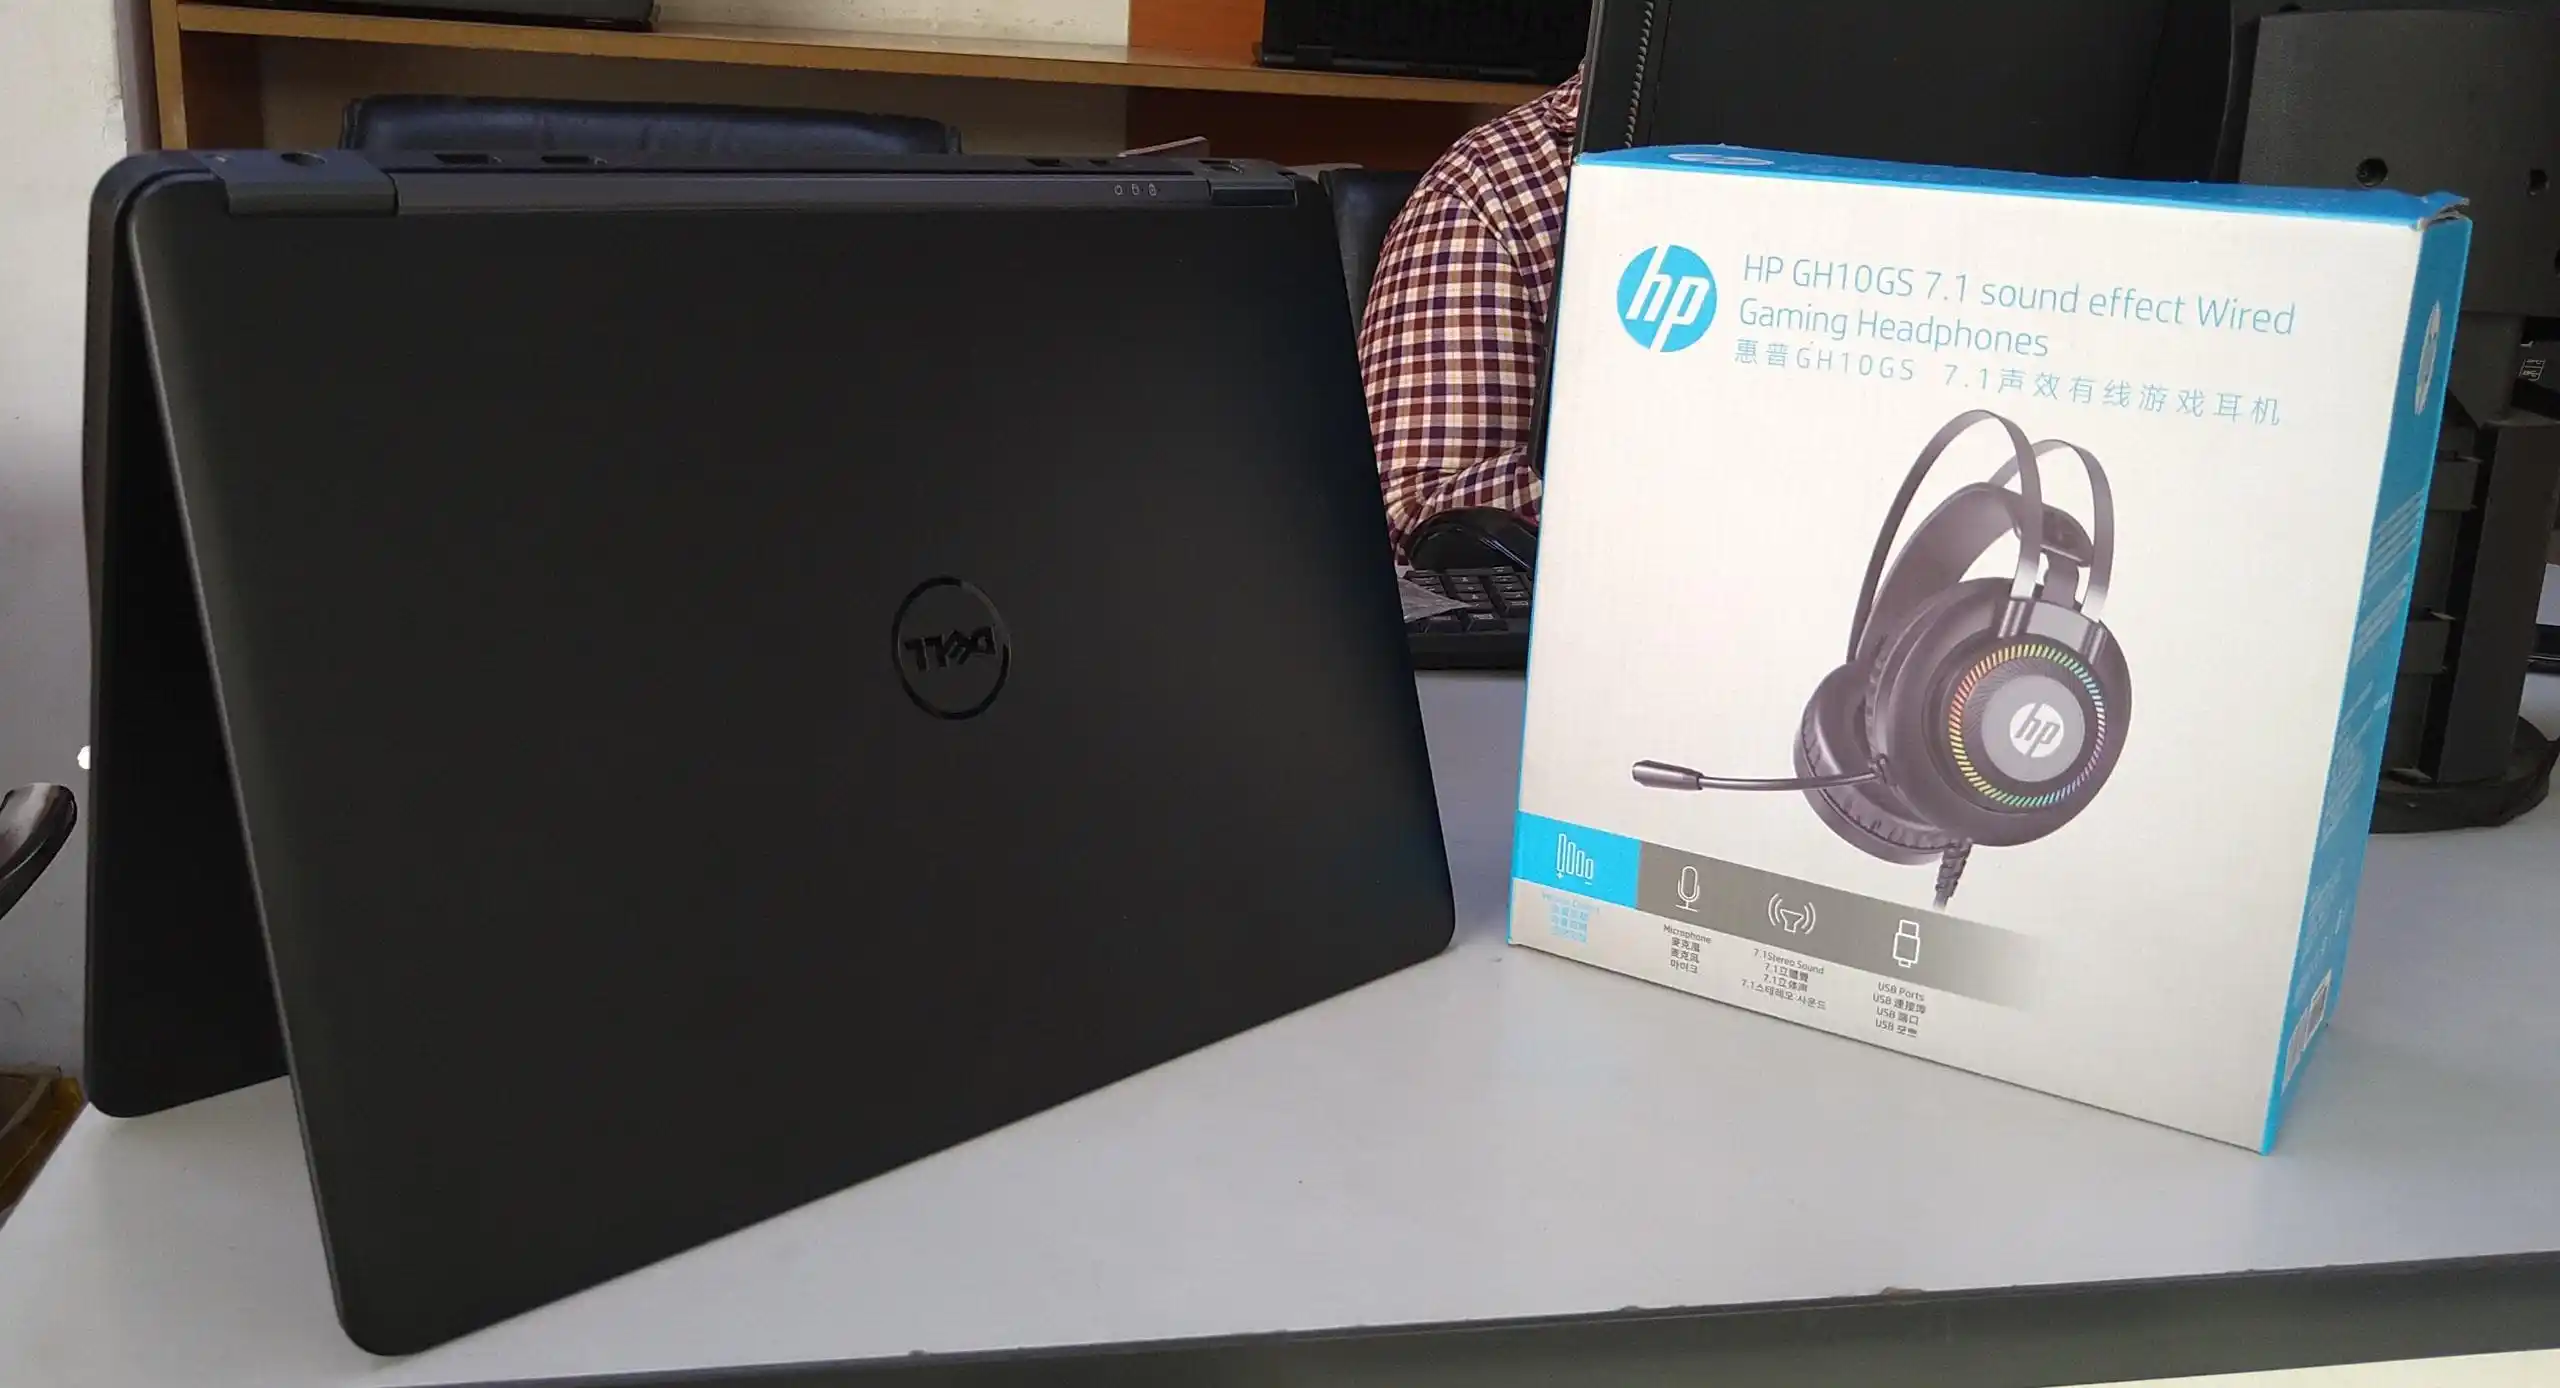 Dell 7450 Core I7 Ram 4Gb Hdd 500Gb Na Hp Headphones Ina Microphone, Voice And Usb Port.